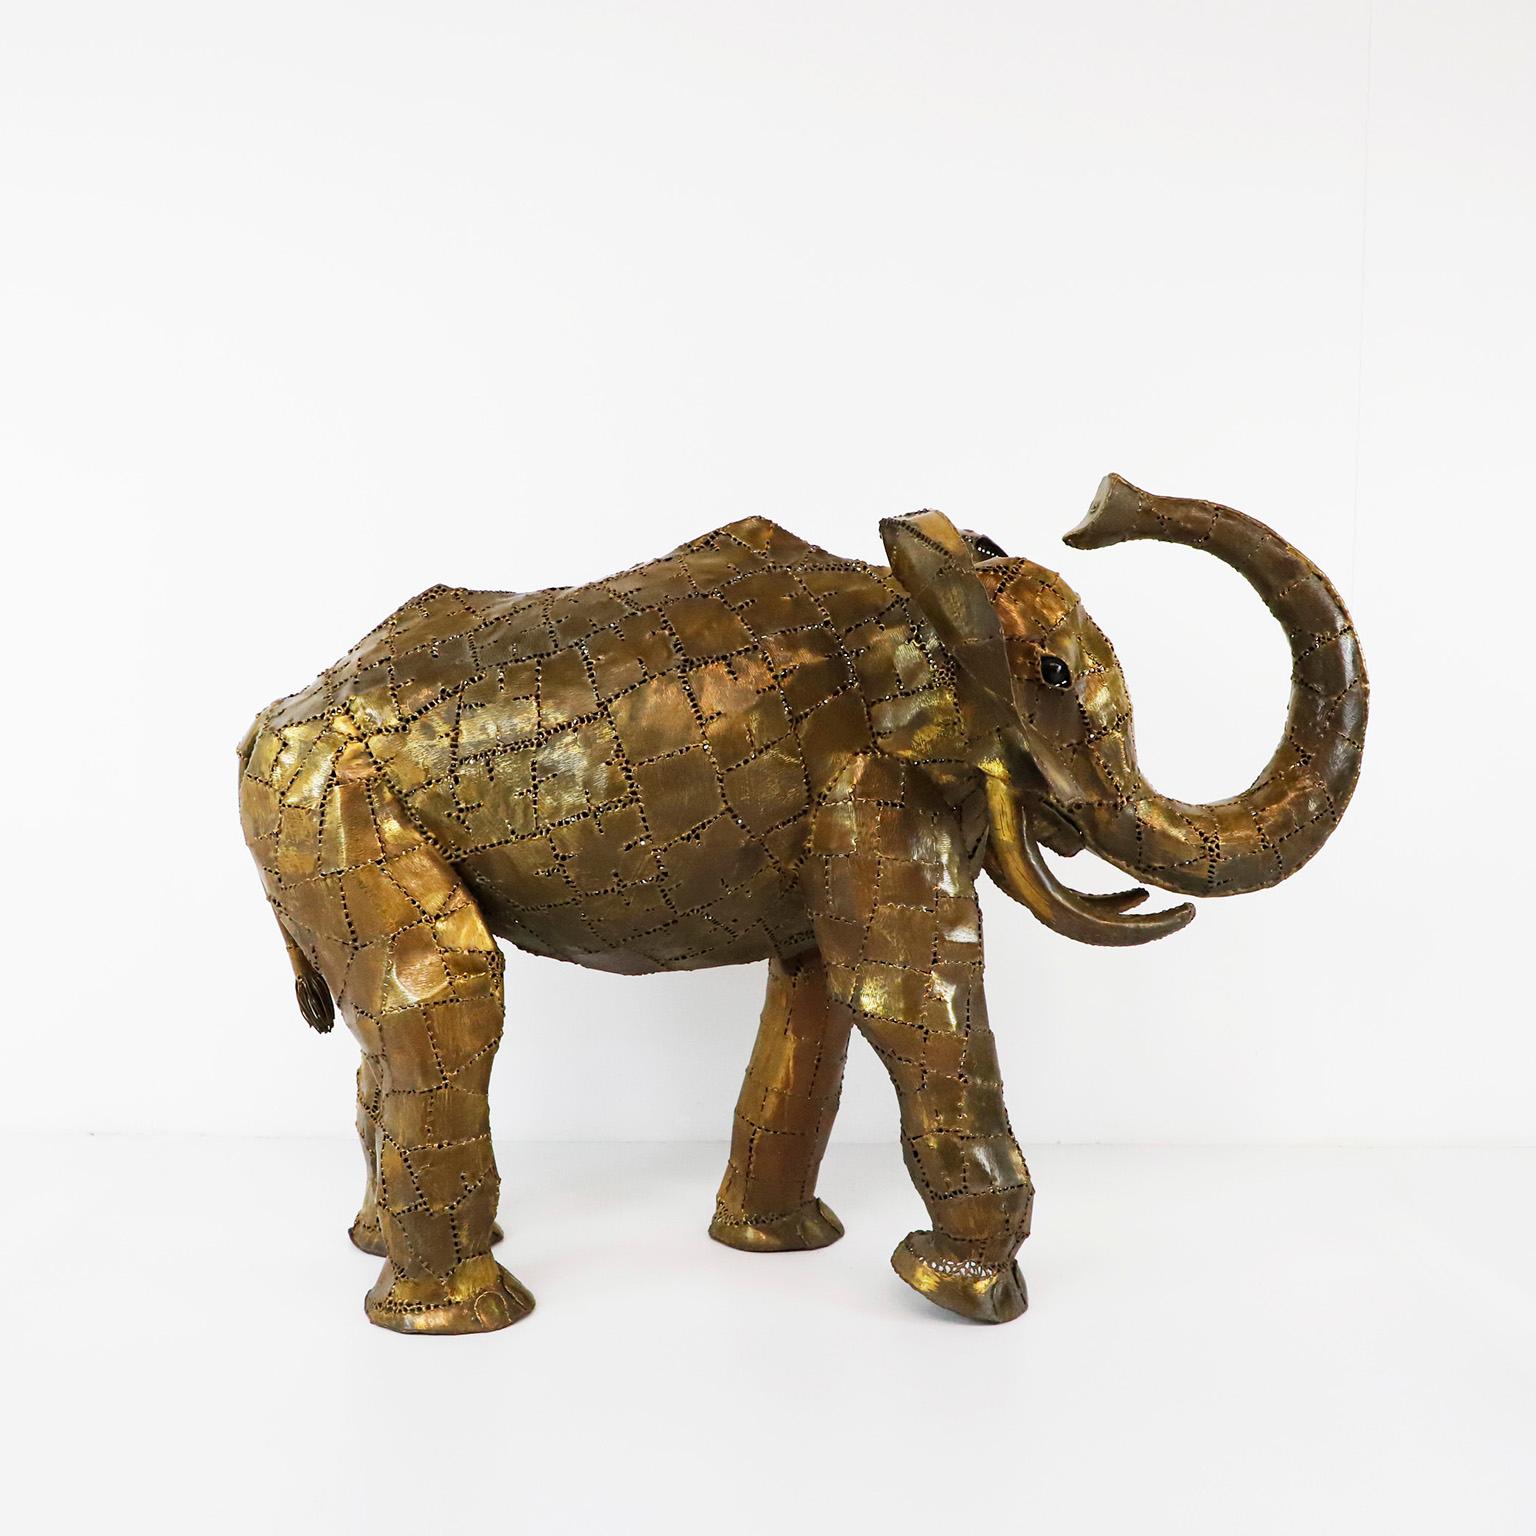 Circa 1960, We offer this big size Brutalist elephant figure in the style of to Sergio Bustamante.

Sergio Bustamante is a Mexican Artist and sculptor. He began with paintings and papier mache figures, inaugurating the first exhibit of his works